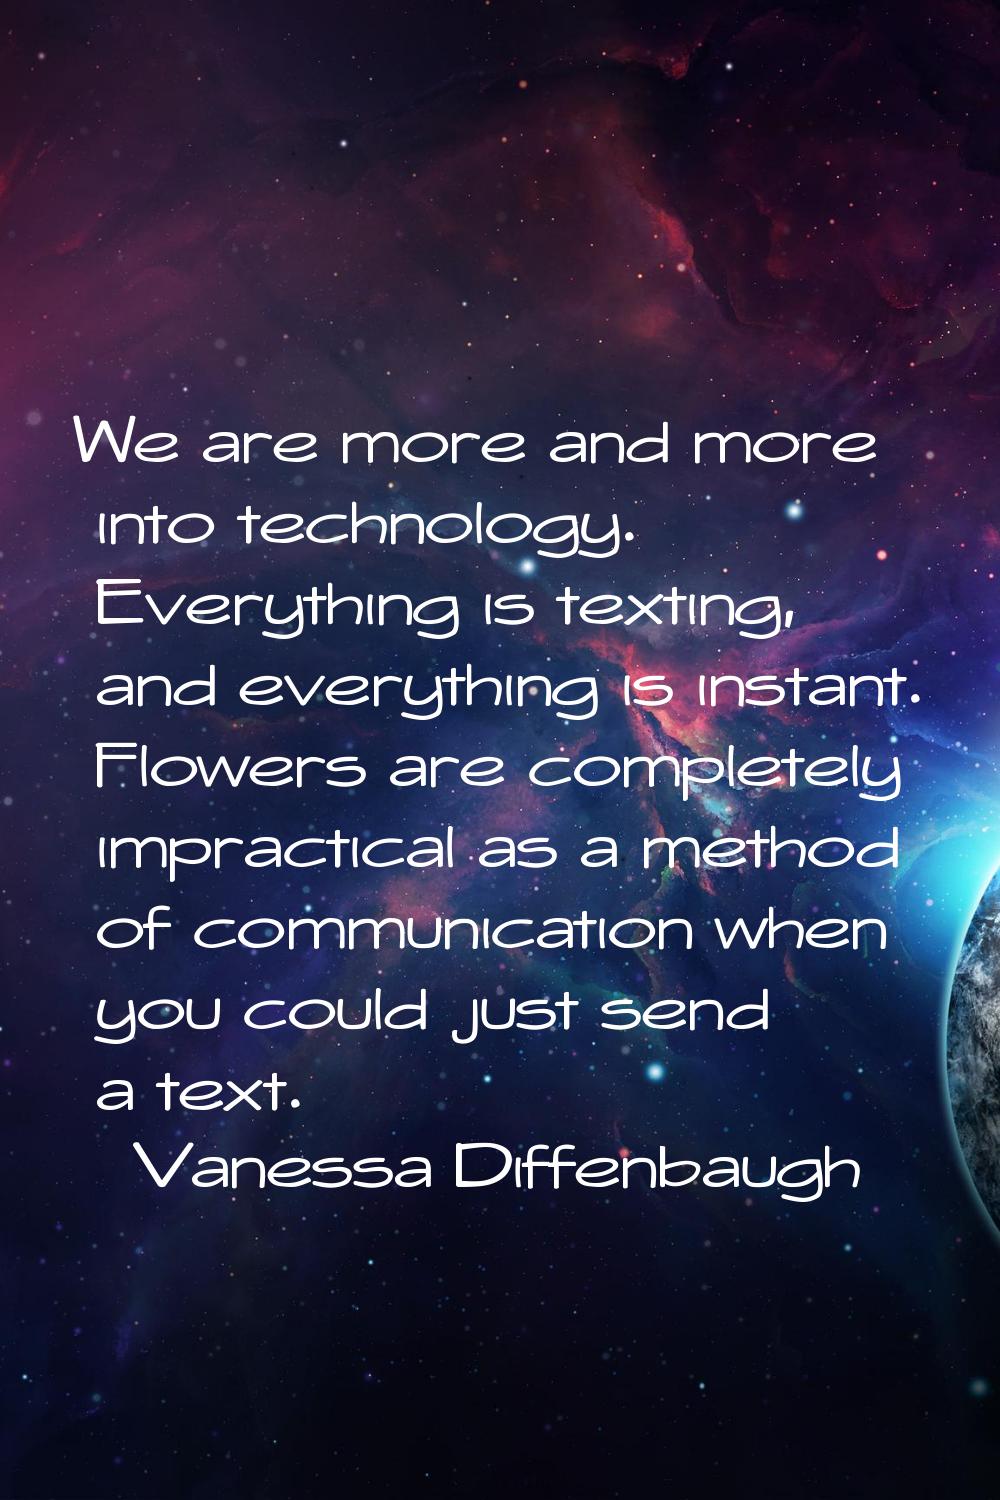 We are more and more into technology. Everything is texting, and everything is instant. Flowers are